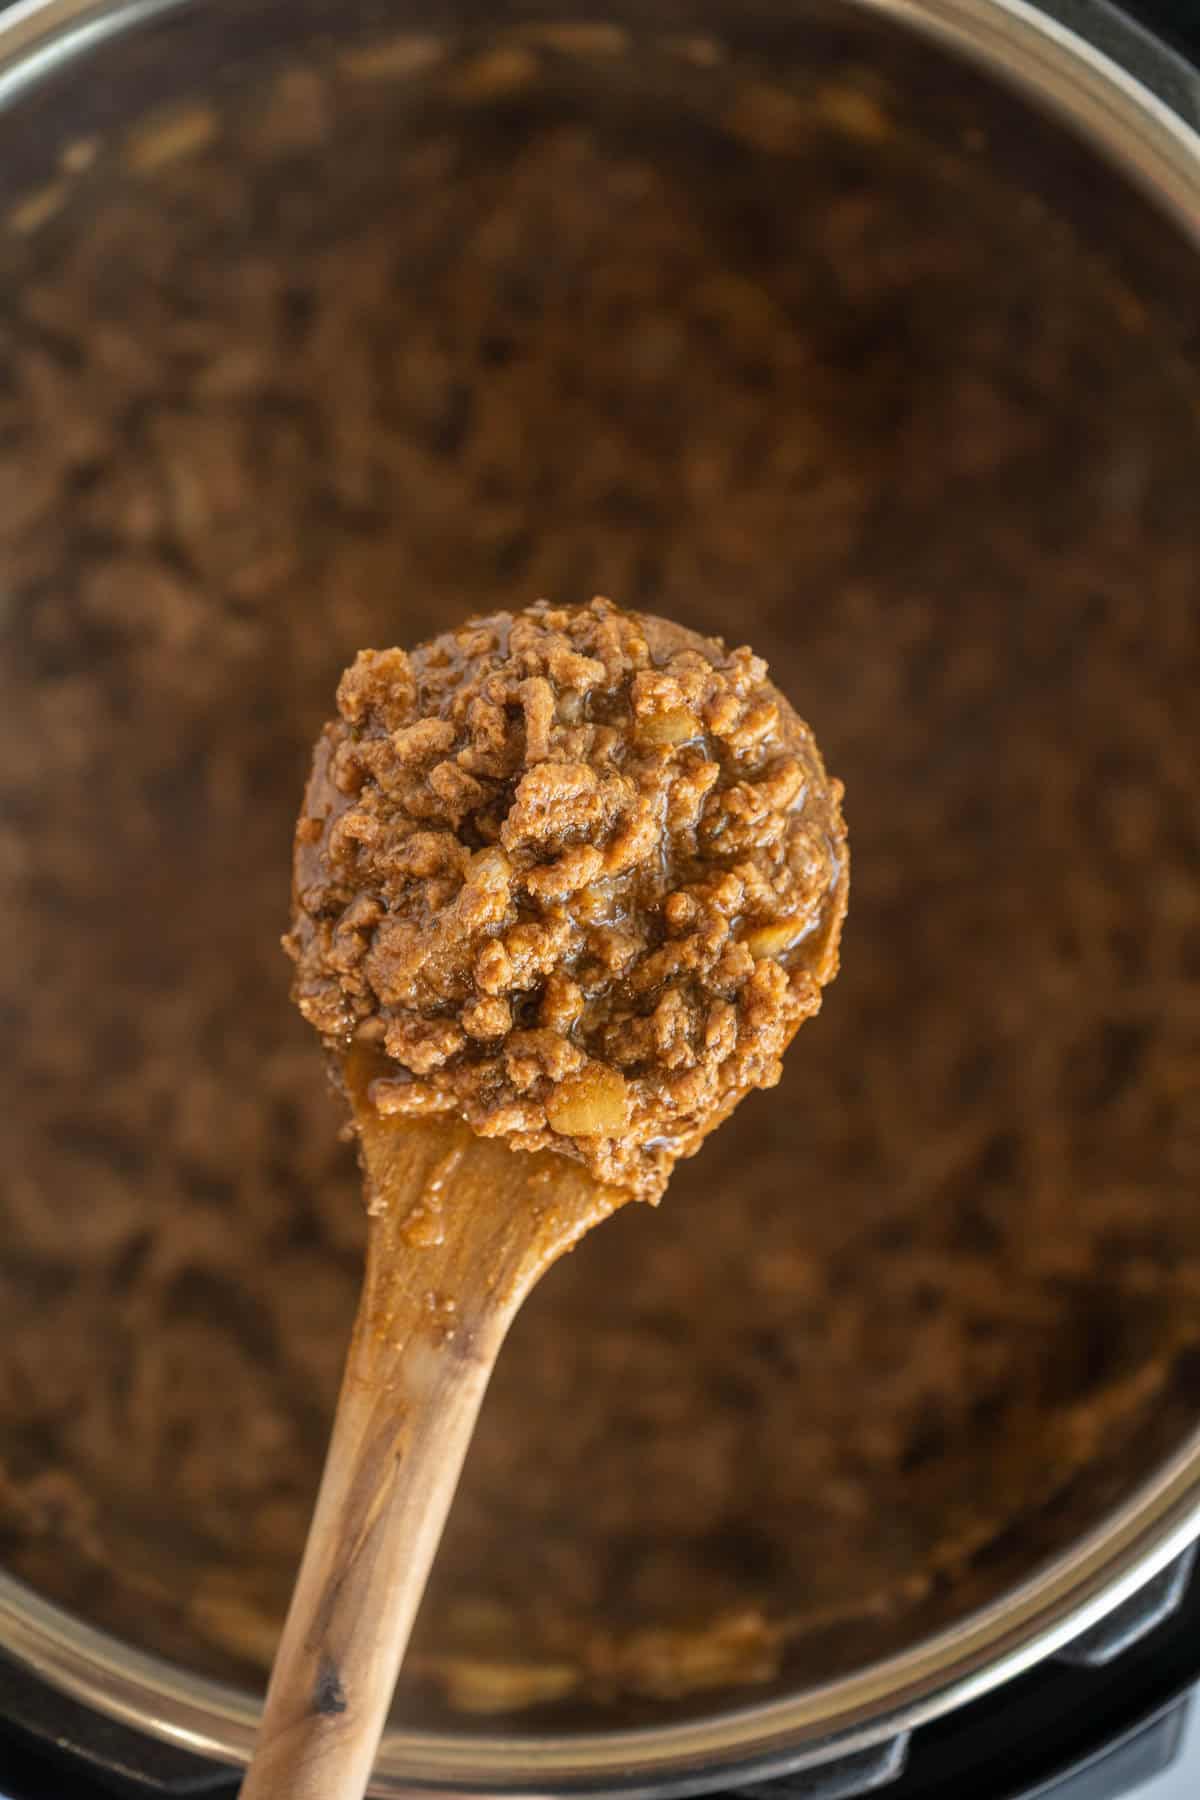 A Wooden Spoon Holding a Bite of Ground Beef Over an Instant Pot